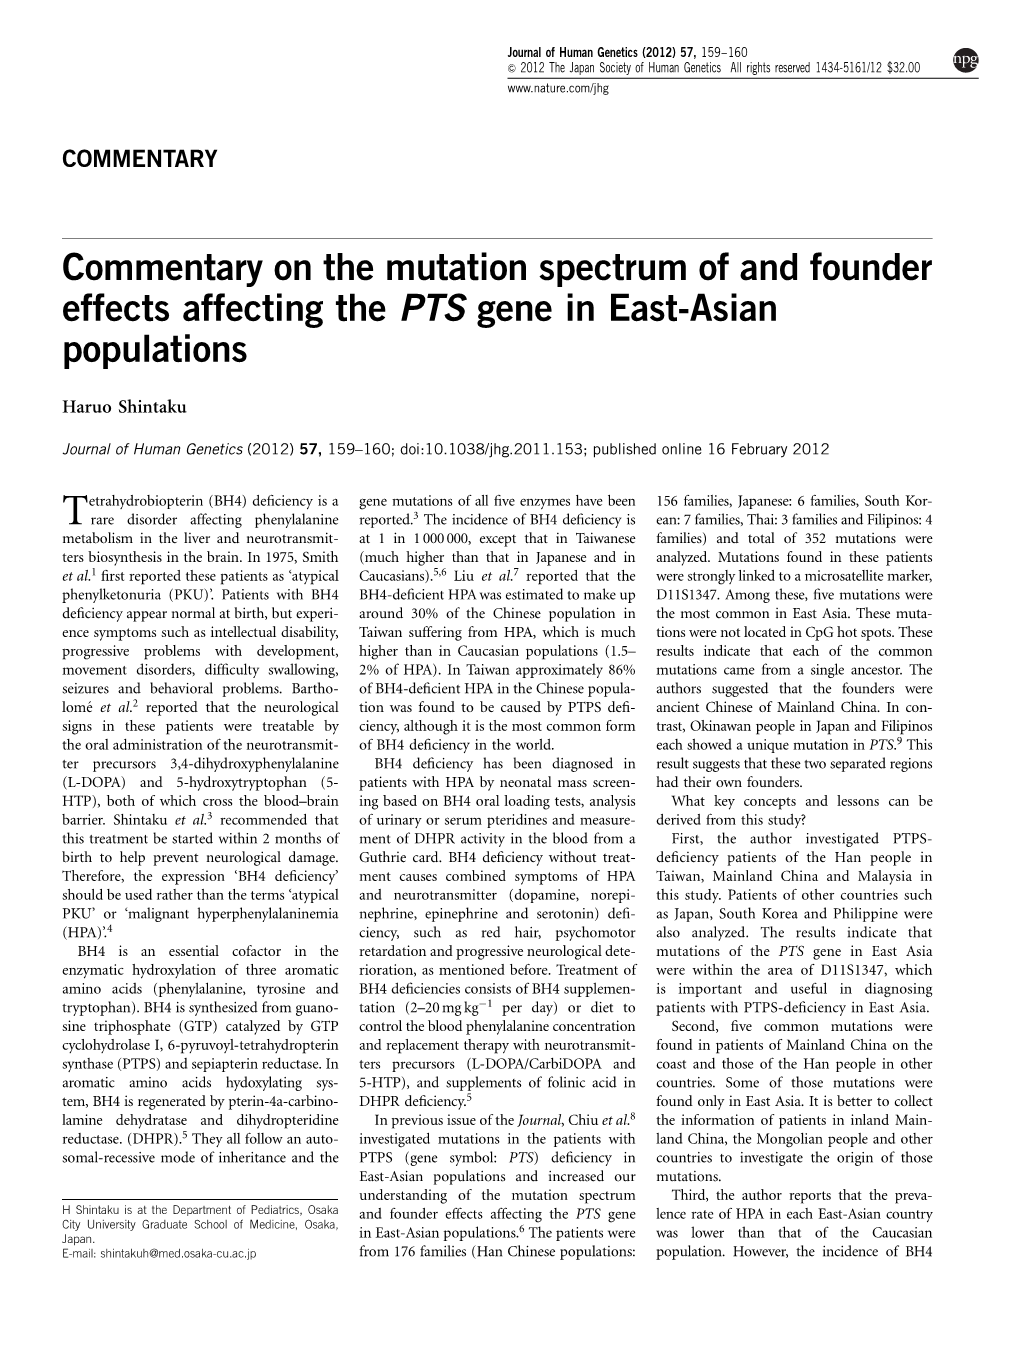 Commentary on the Mutation Spectrum of and Founder Effects Affecting the PTS Gene in East-Asian Populations